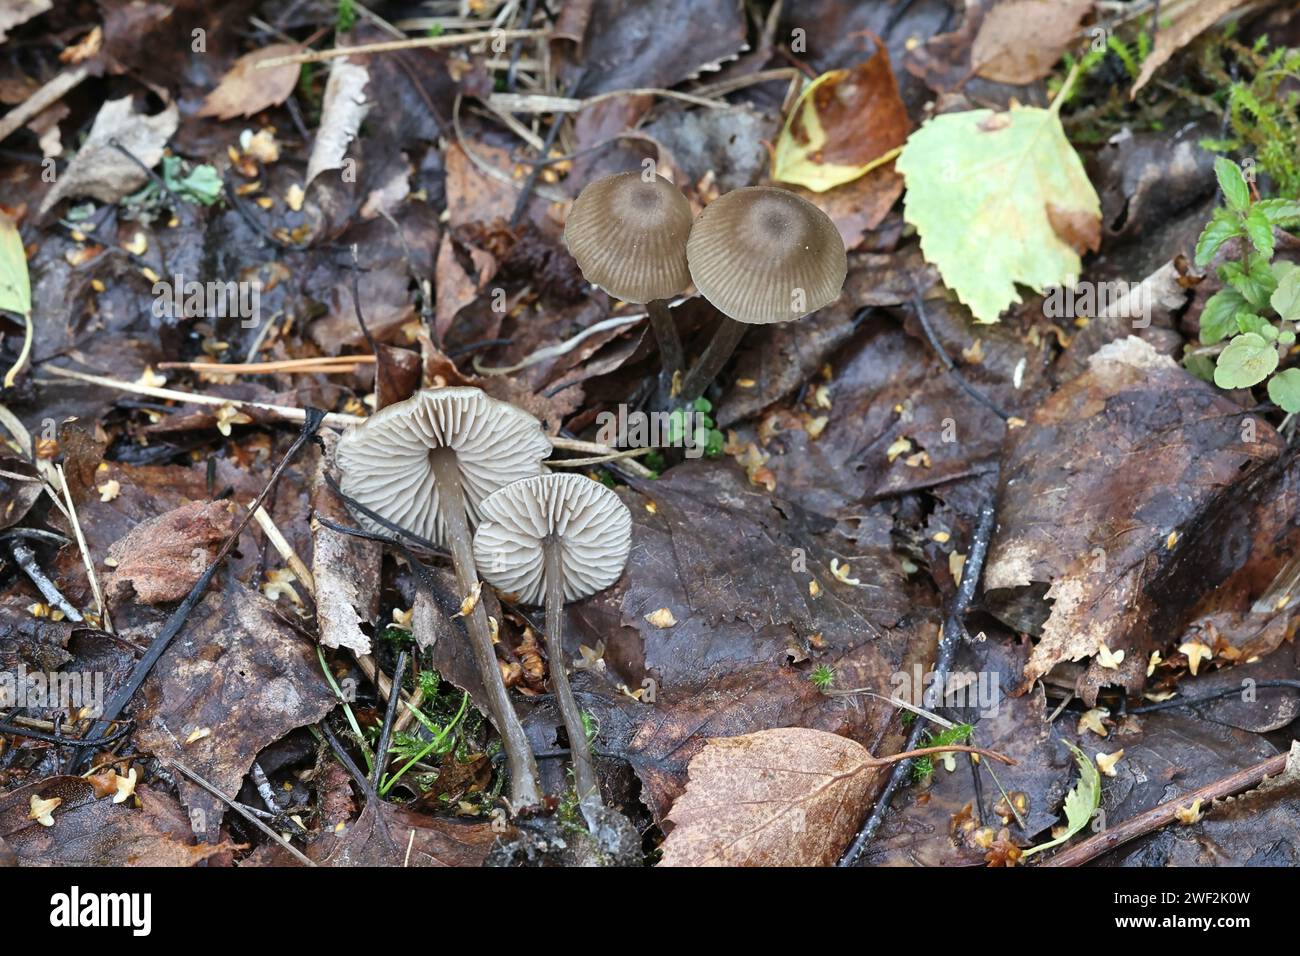 Entoloma juncinum, a pinkgill mushroom from Finland, no common English name Stock Photo